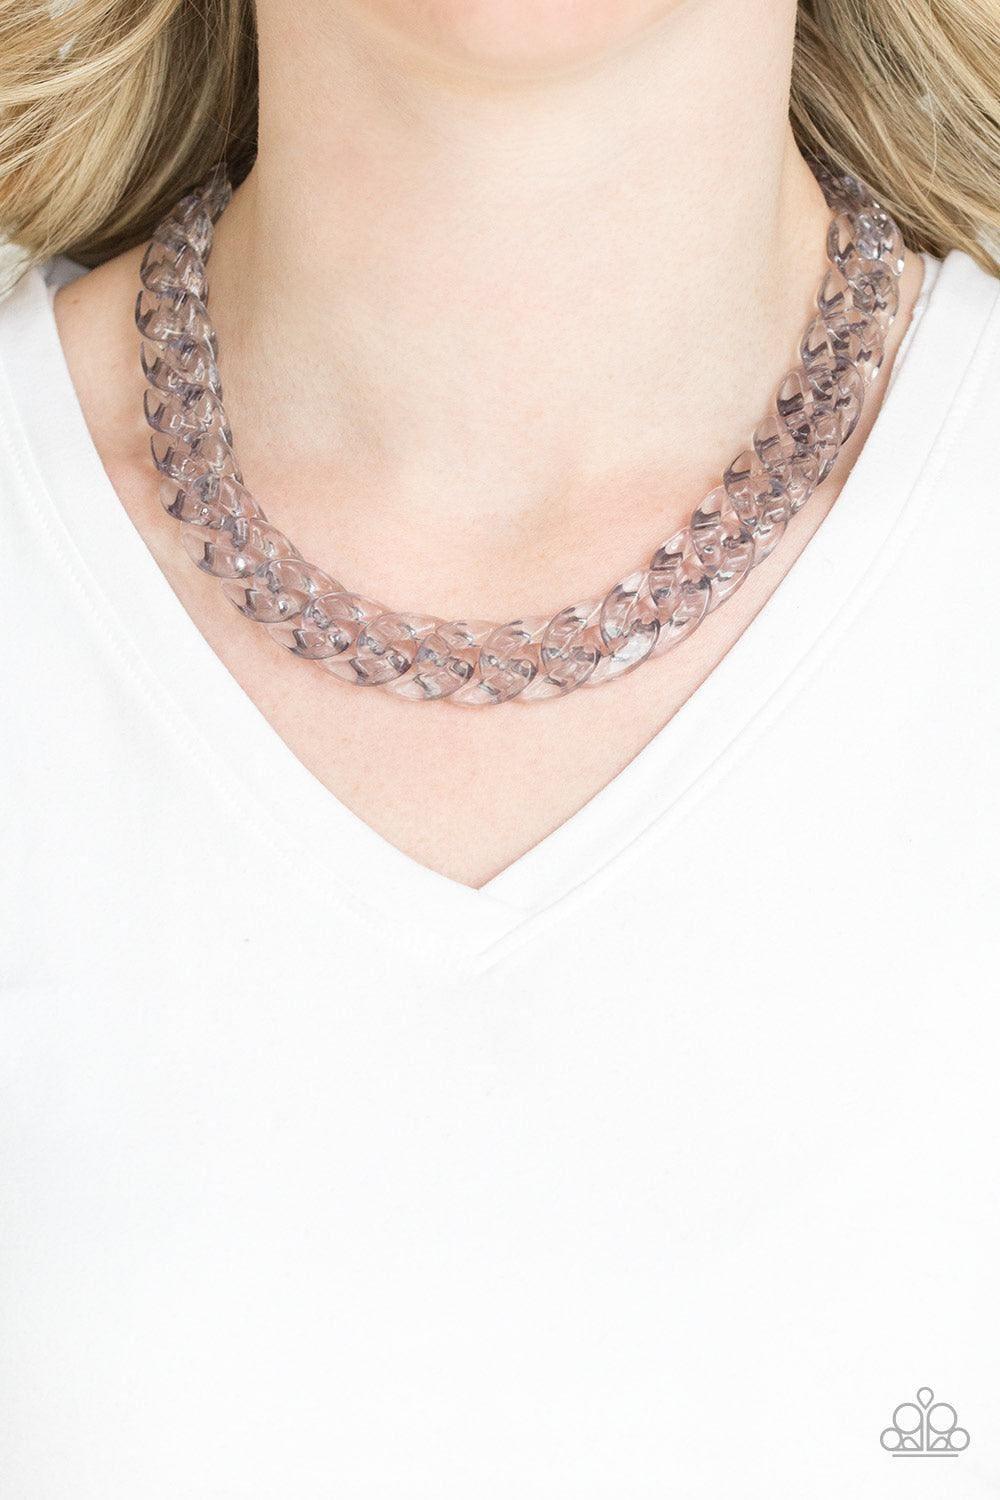 Paparazzi Accessories - Put It On Ice - Silver Necklace - Bling by JessieK